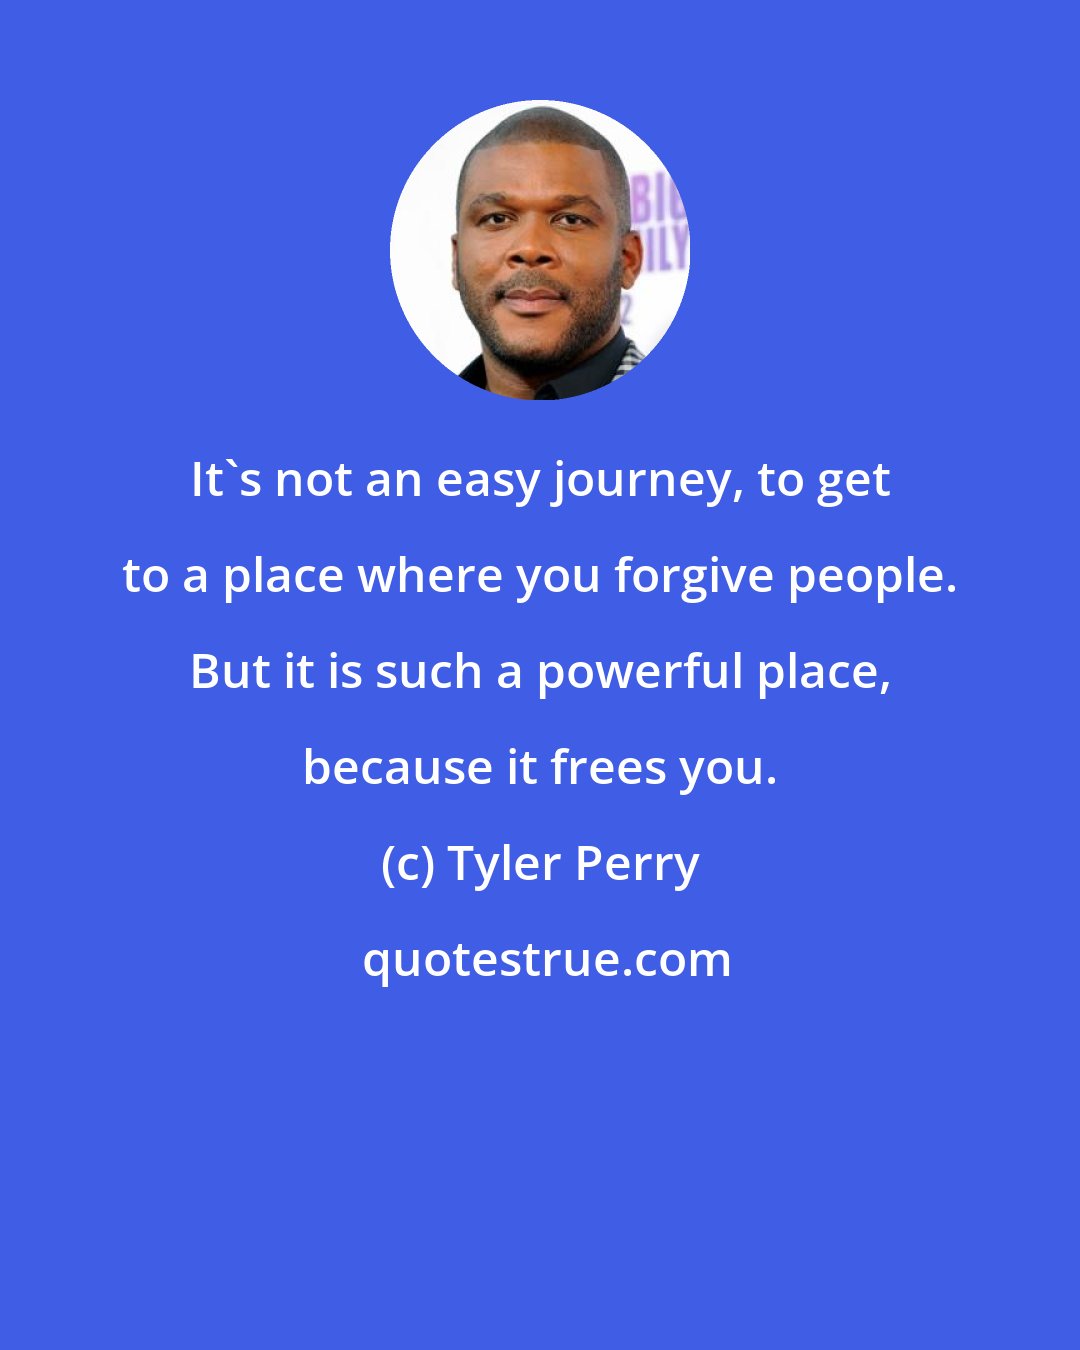 Tyler Perry: It's not an easy journey, to get to a place where you forgive people. But it is such a powerful place, because it frees you.